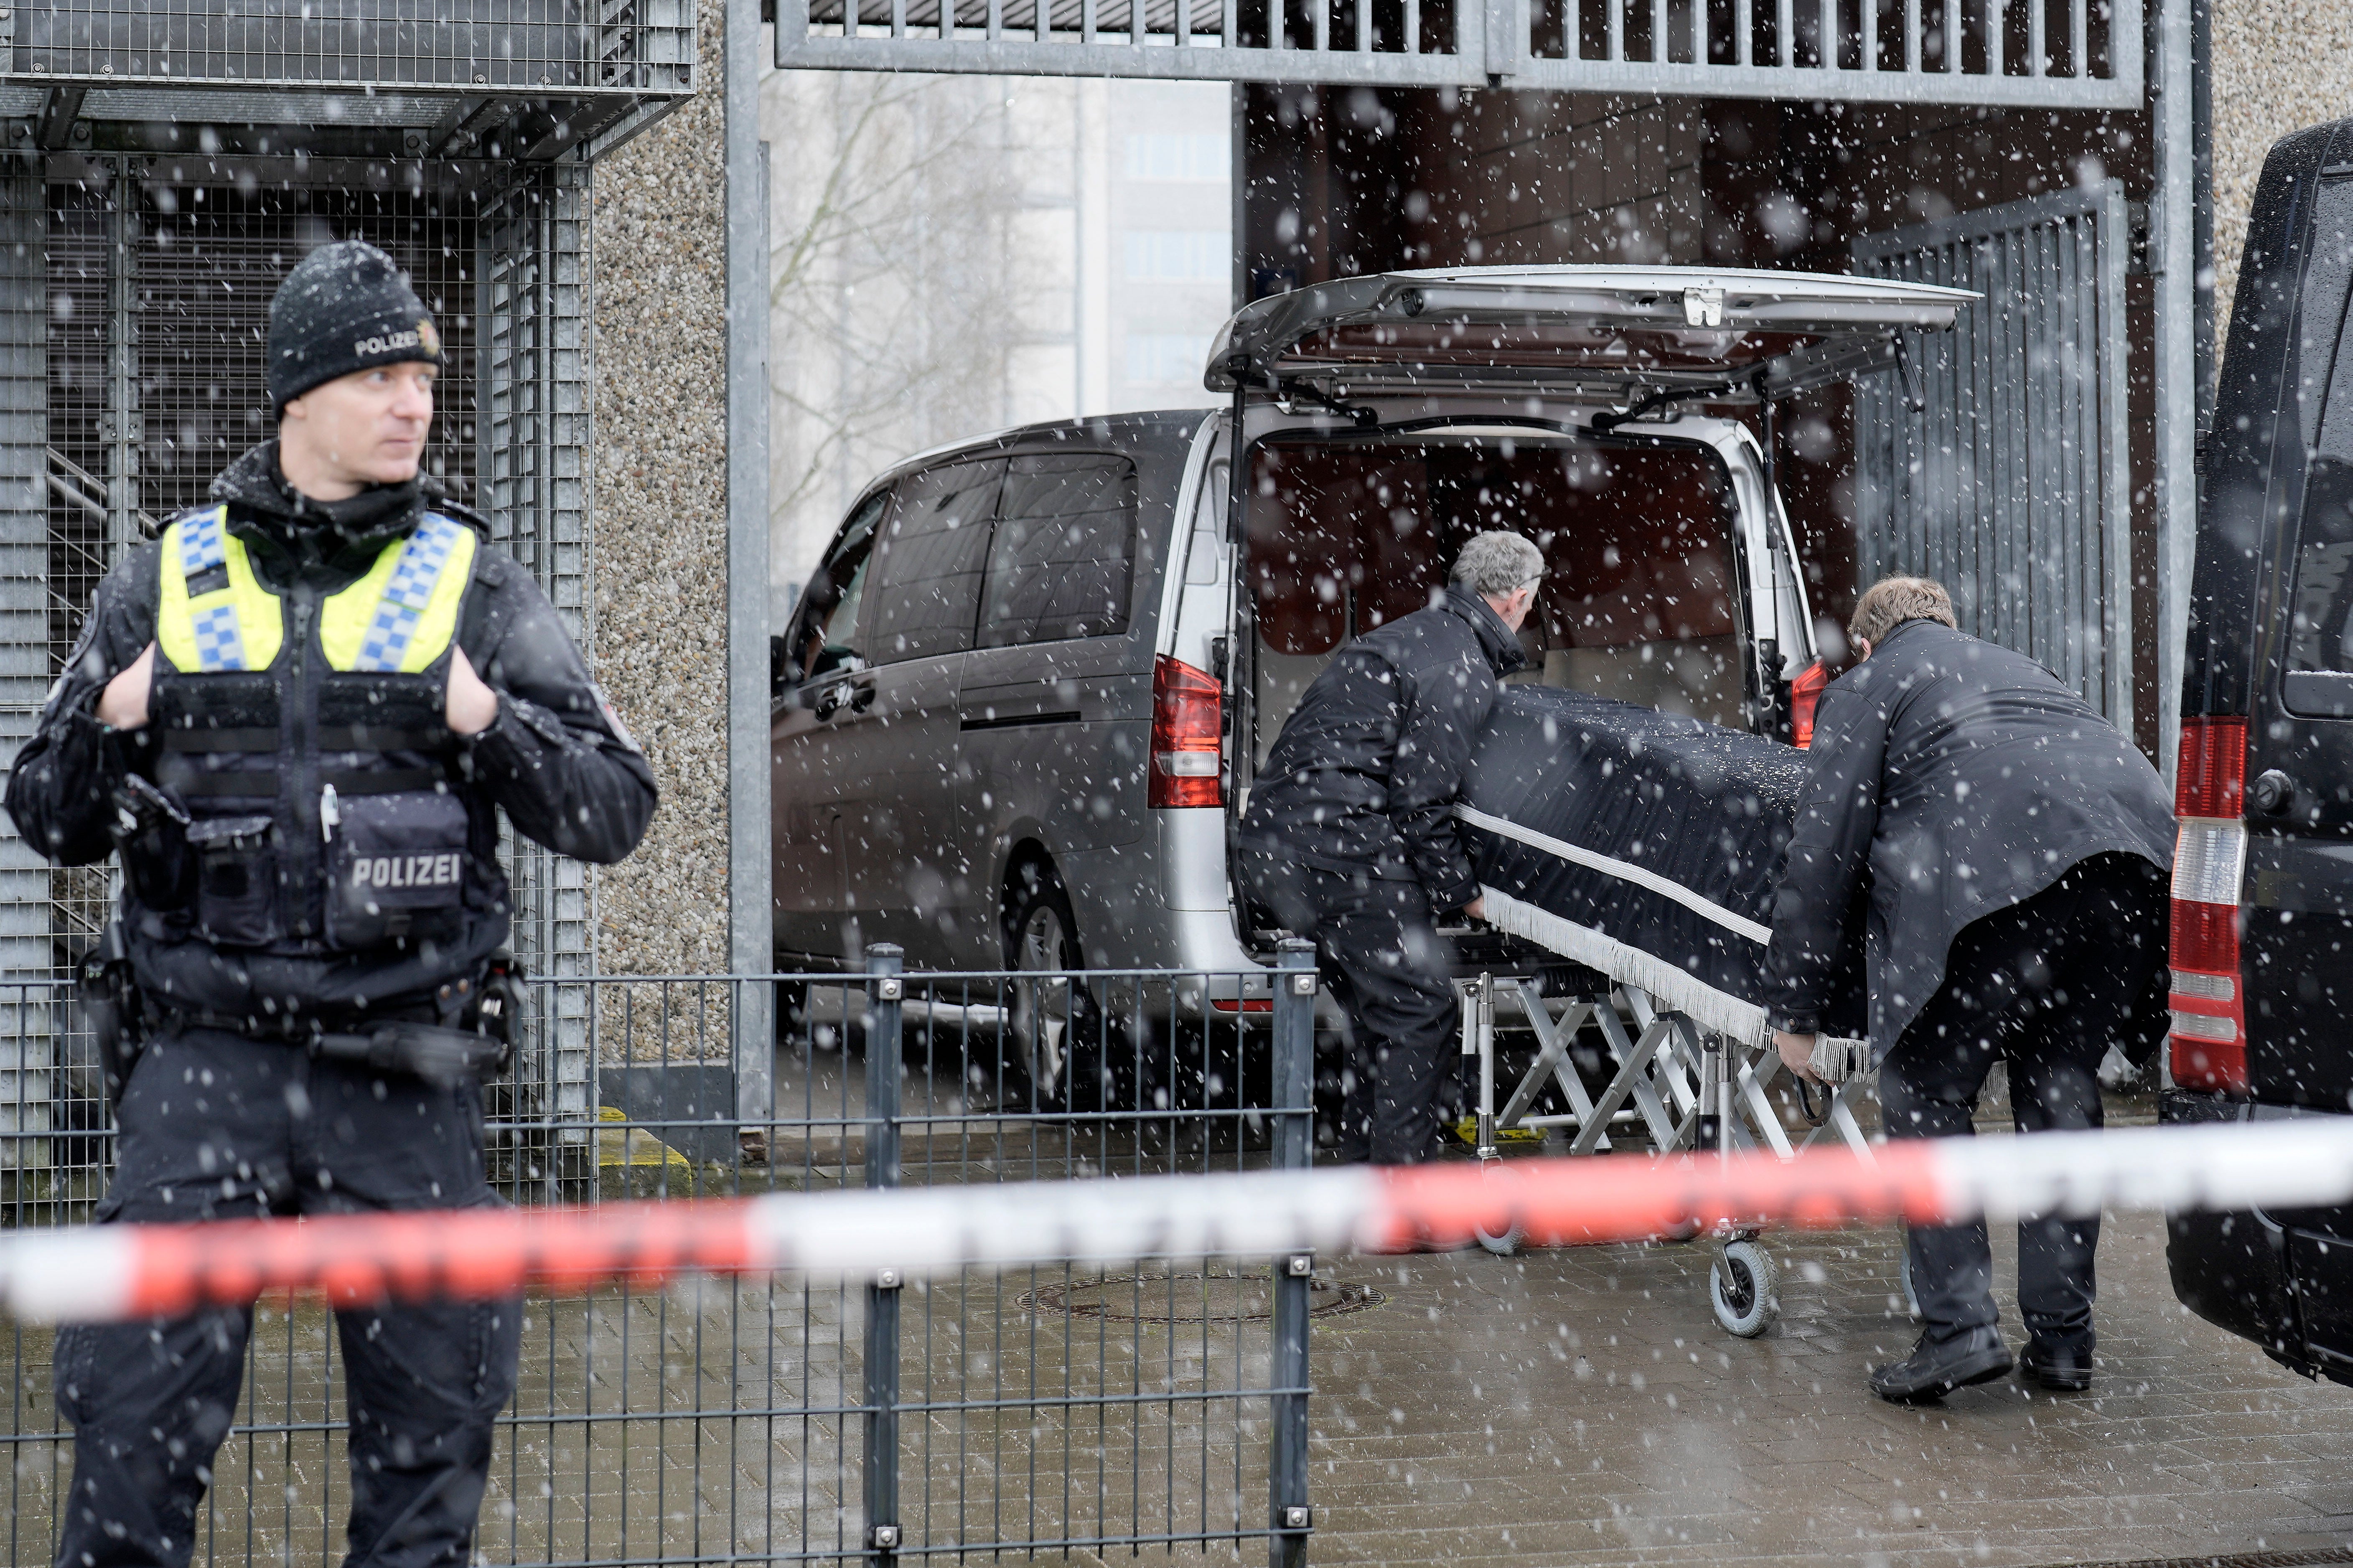 German shooting: 7 dead including one unborn child at Jehovah's Witness meeting